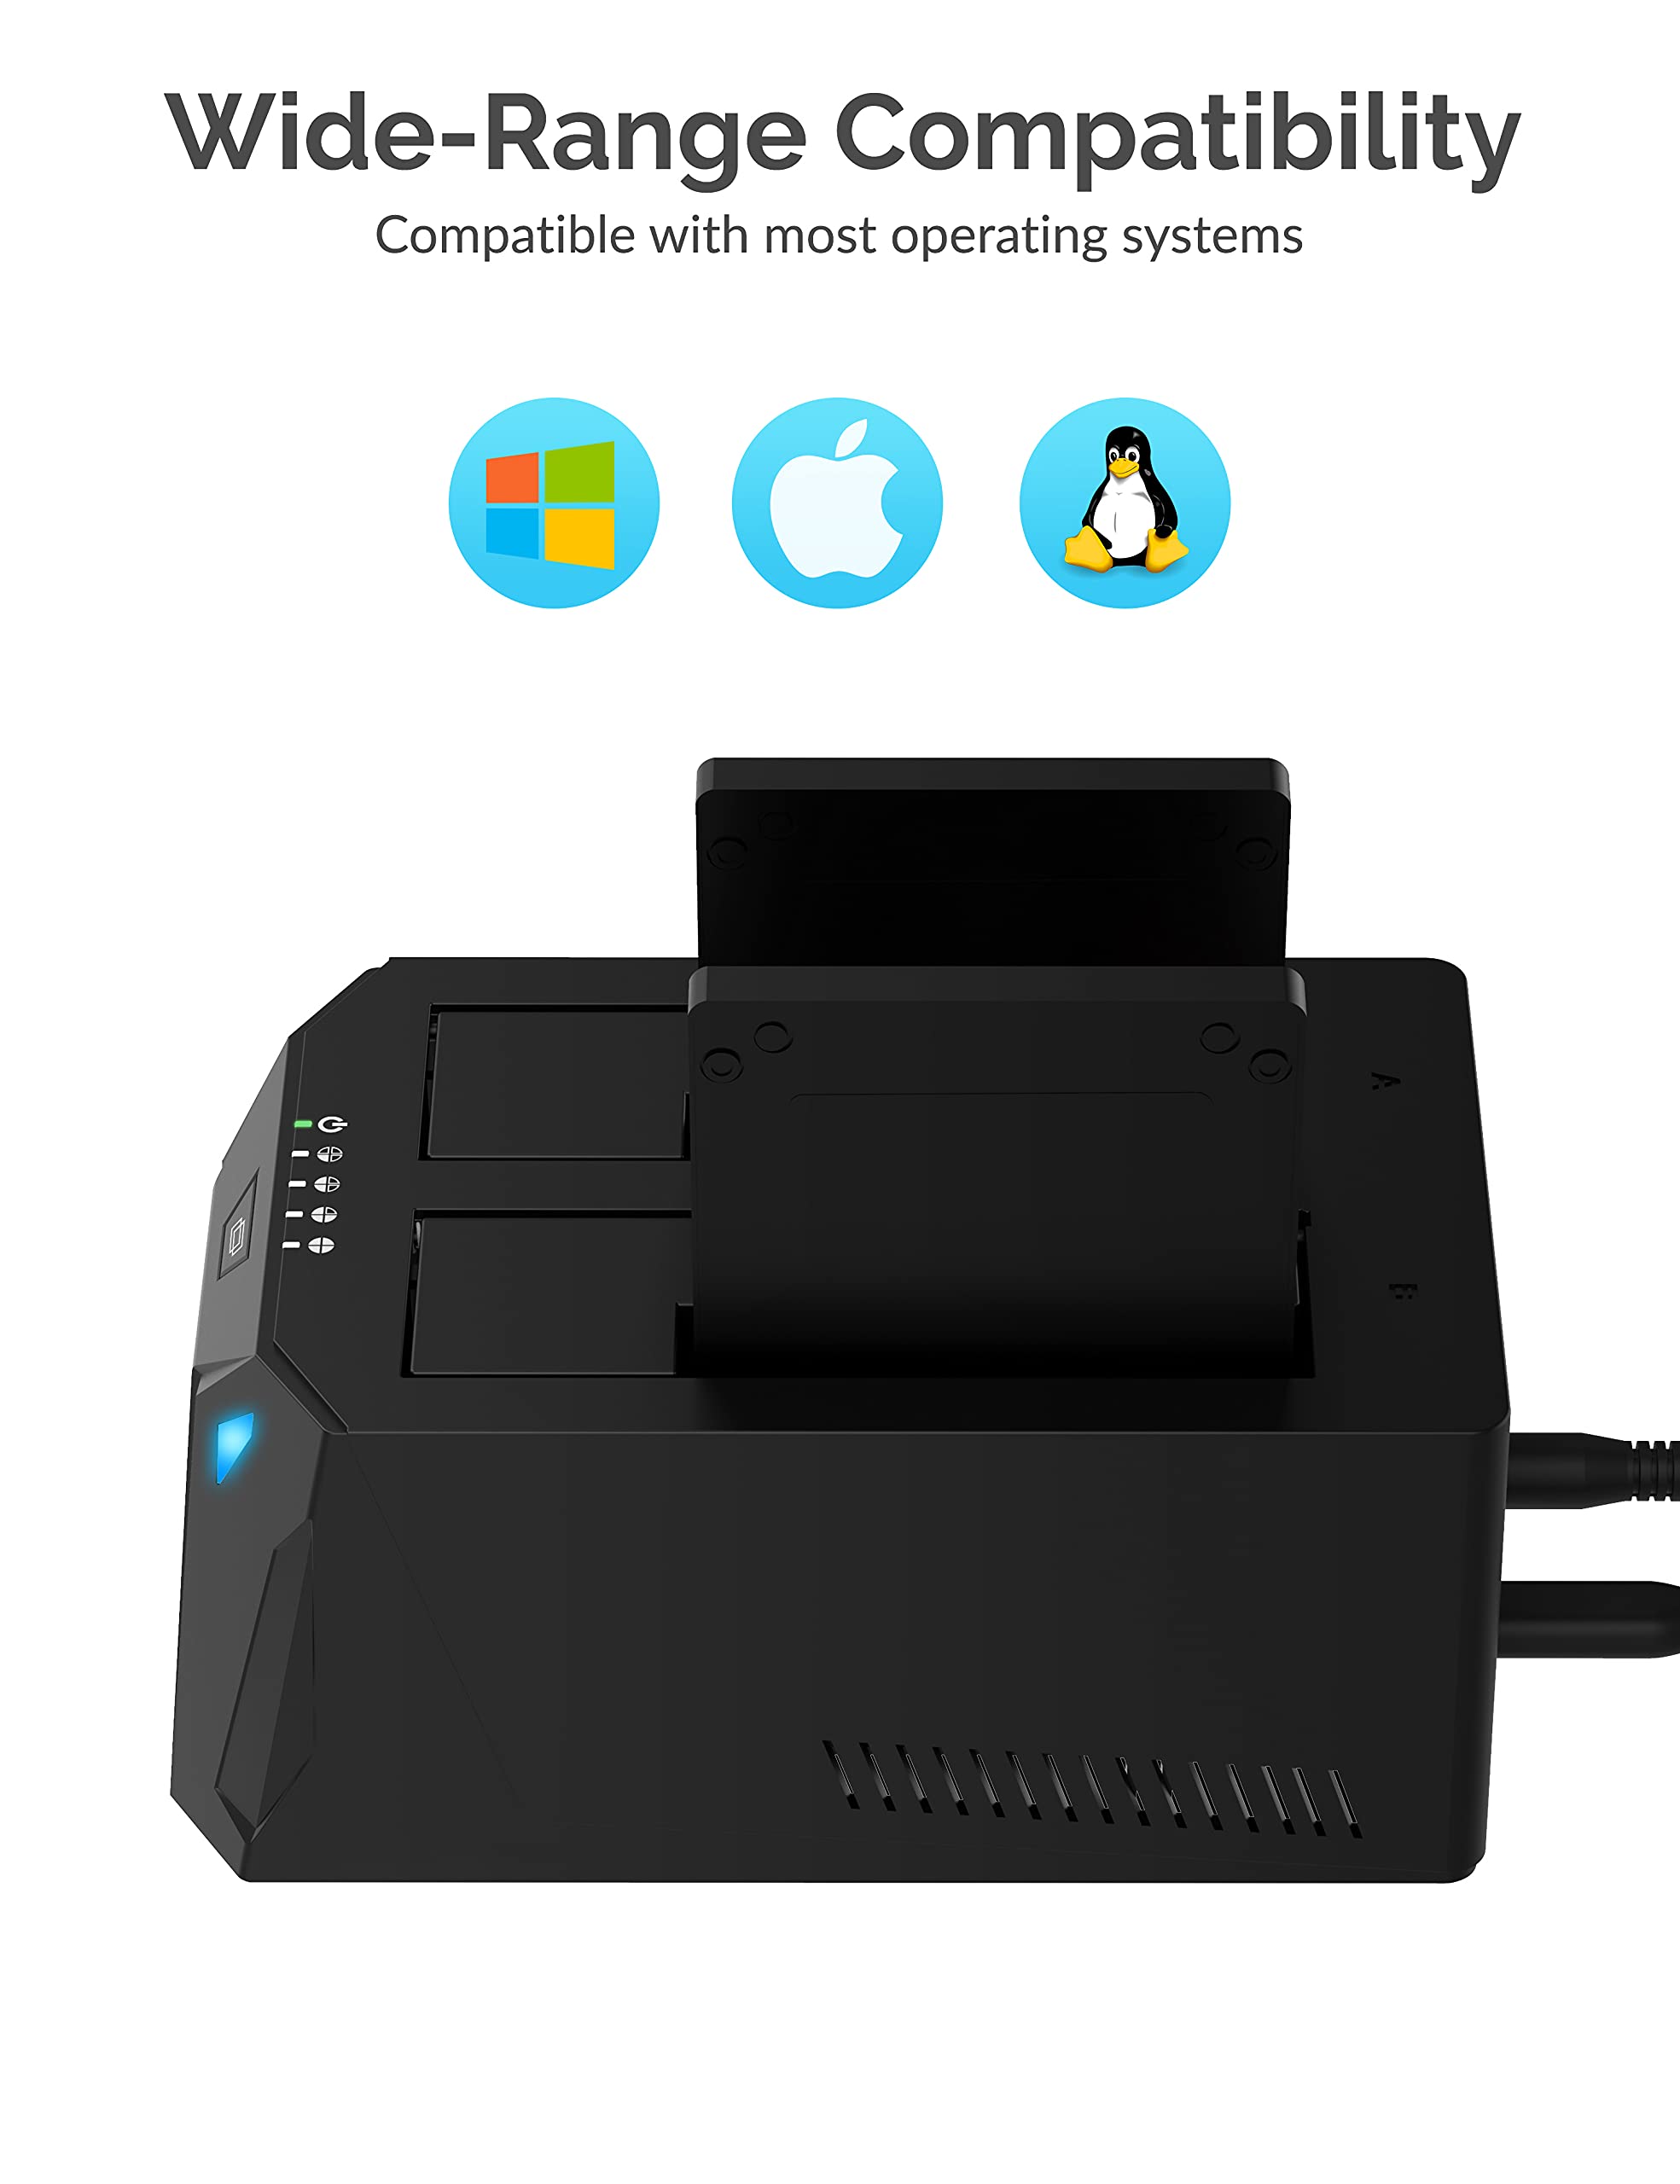 SABRENT USB Type C SATA 2.5” & 3.5” Dual Bay Hard Drive Docking Station | Offline Cloning | Up to 5Gbps | Tool Free Installation (EC-CH2B)